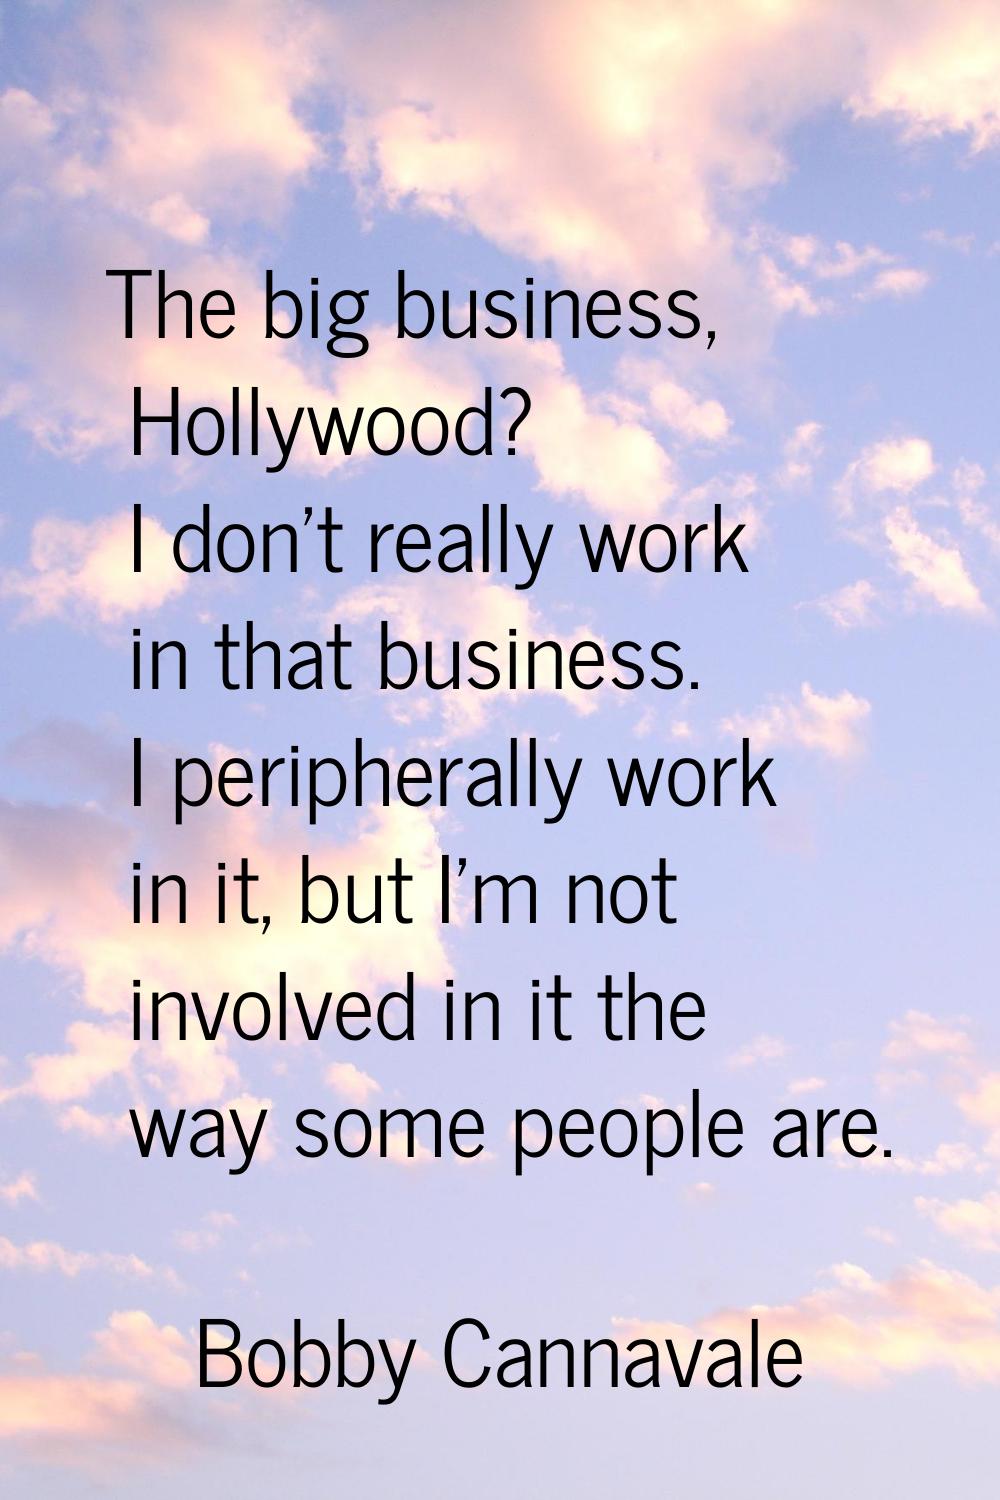 The big business, Hollywood? I don't really work in that business. I peripherally work in it, but I